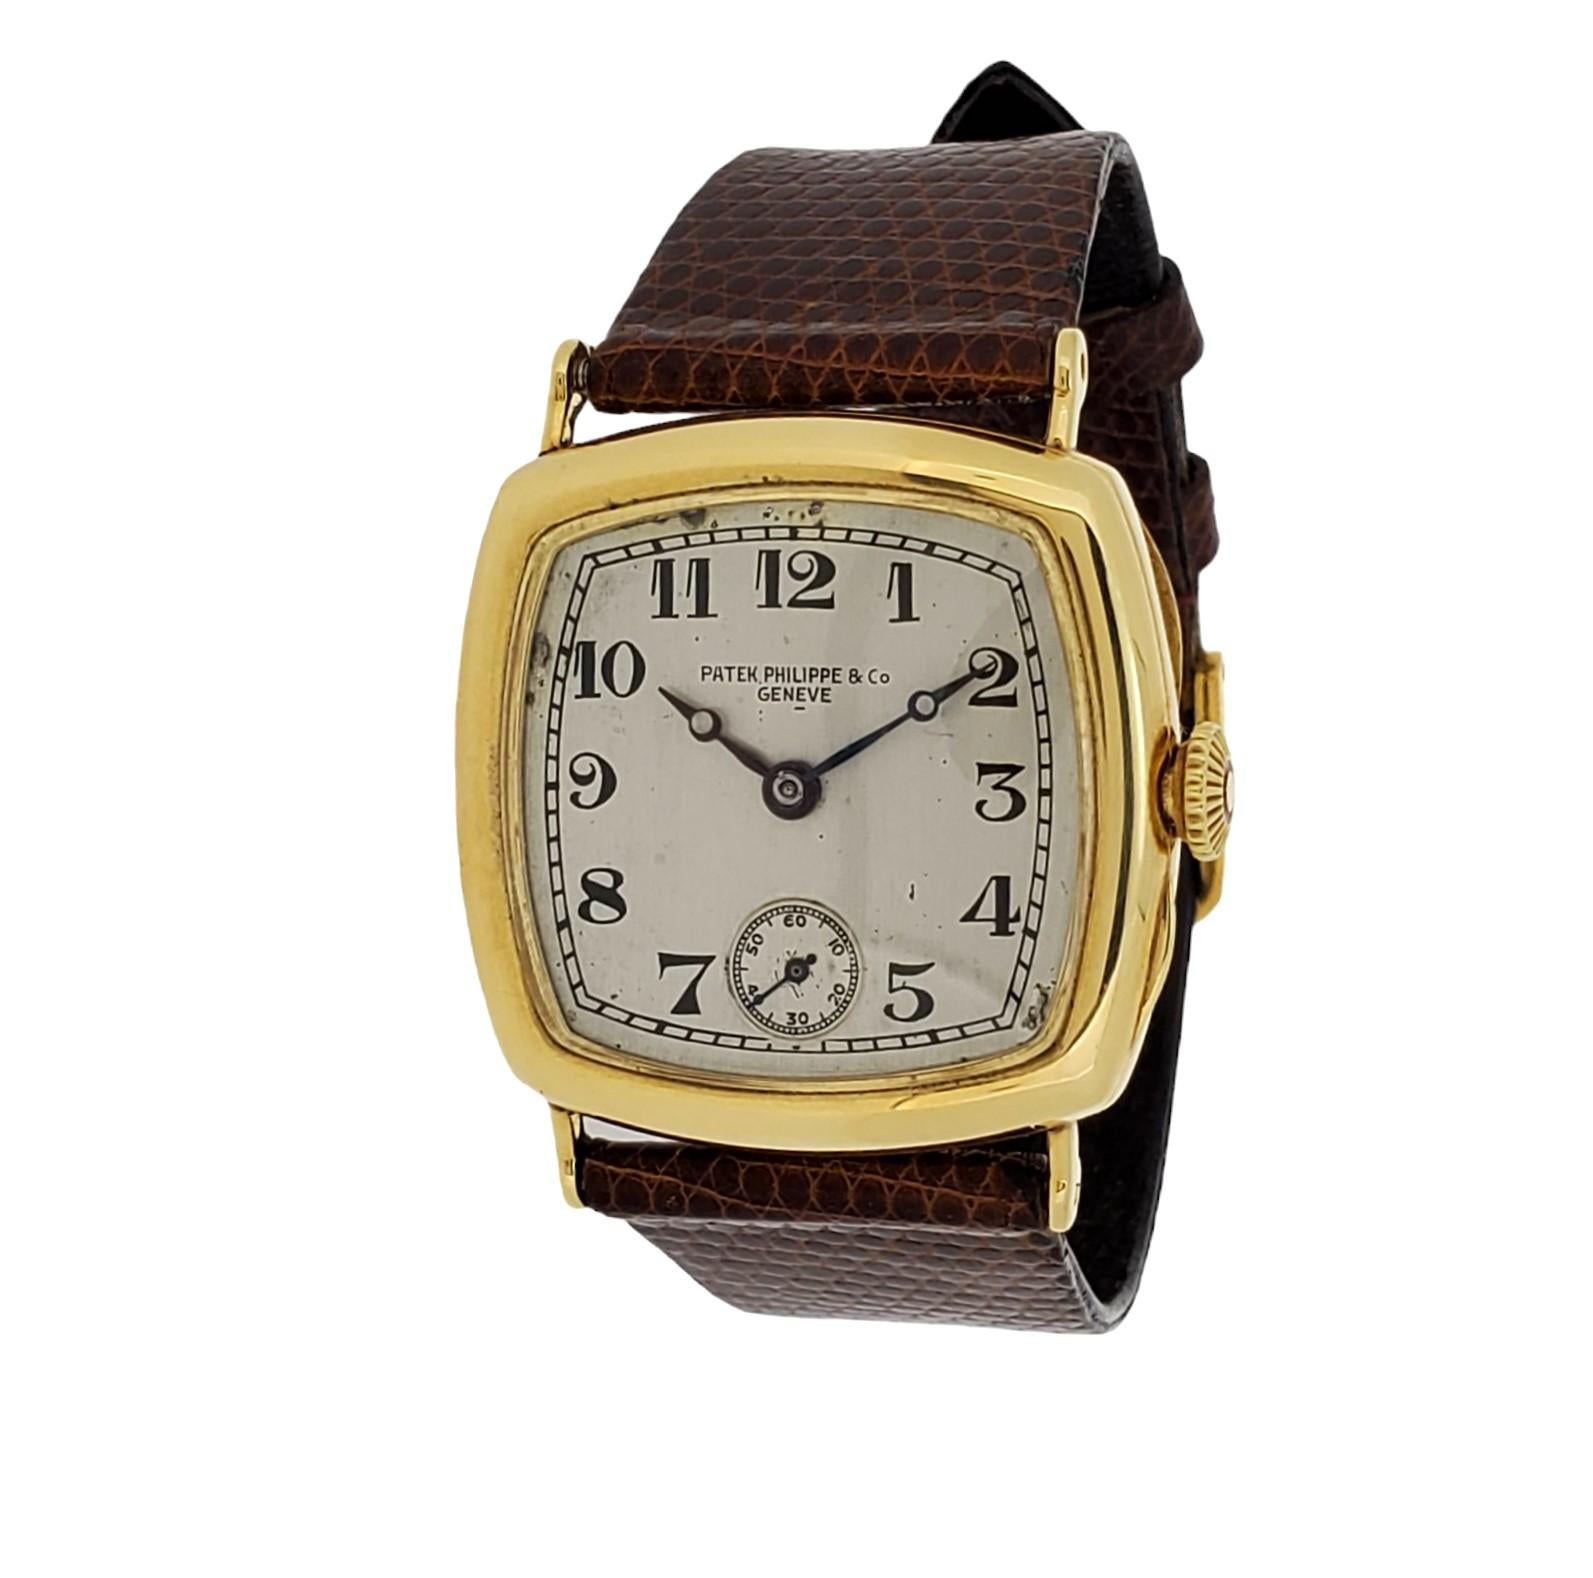 Patek Philippe Early Art Deco Cushion shape watch Circa 1927-1928,  The watch is made in 18K yellow gold and measuring 31 x31 mm.  The watch is fitted with a 10